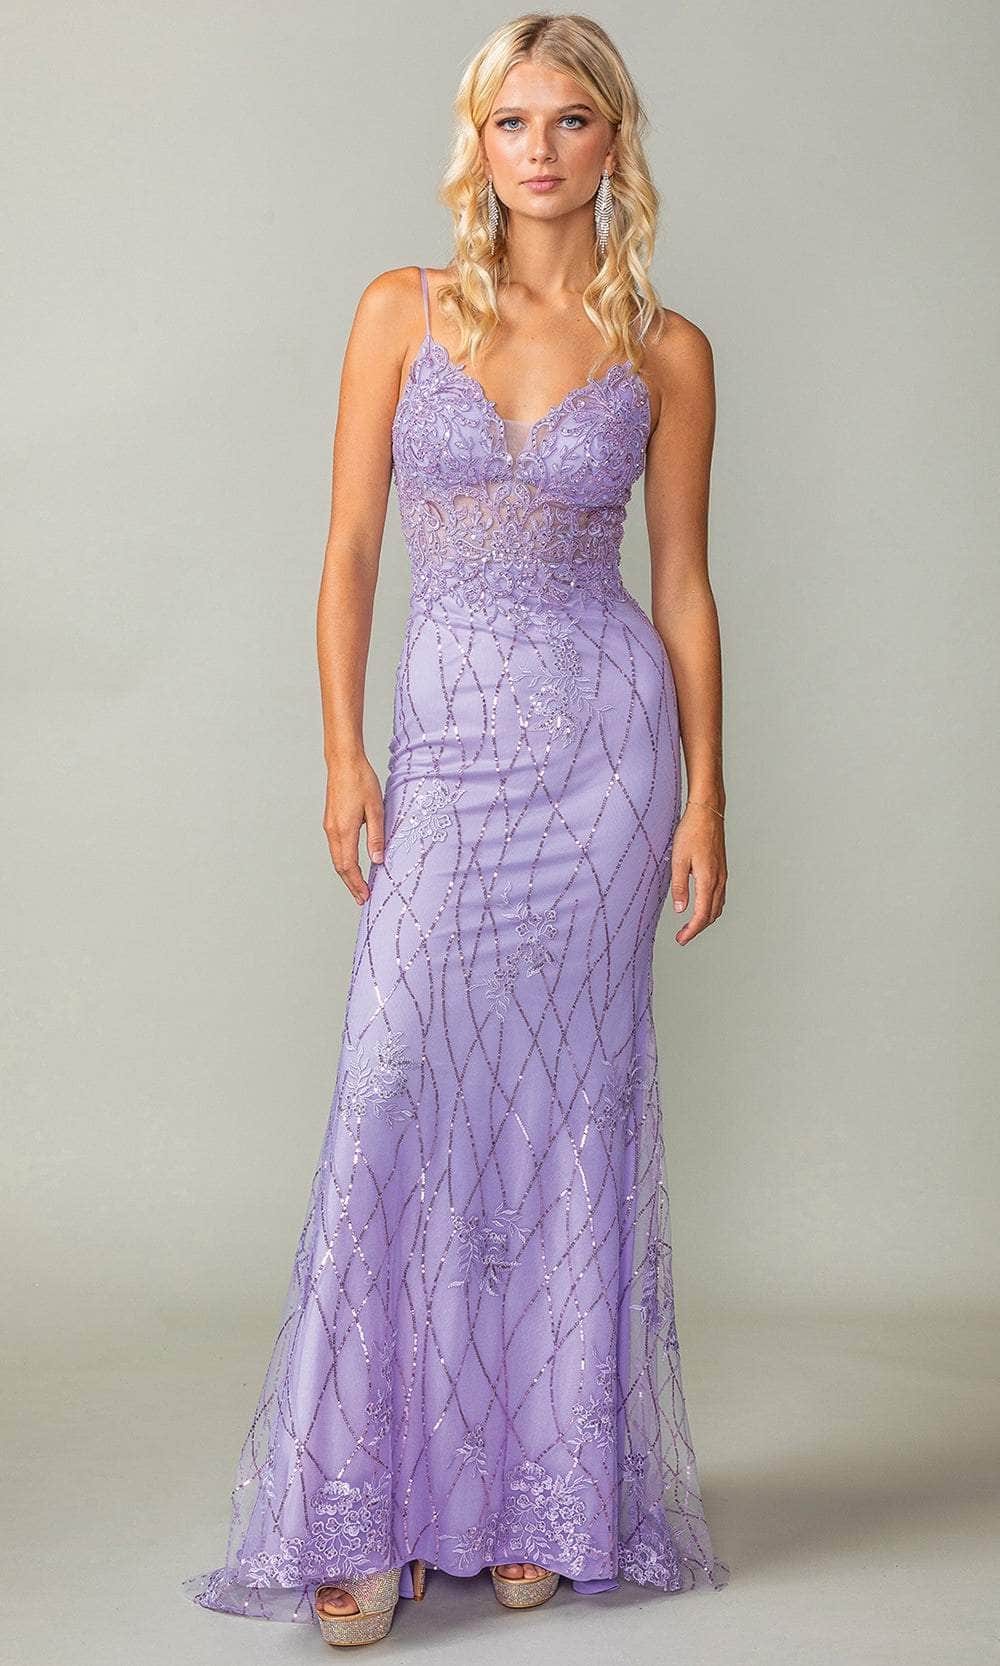 Dancing Queen 4371 - Lace Detail Mermaid Prom Dress Prom Dresses 